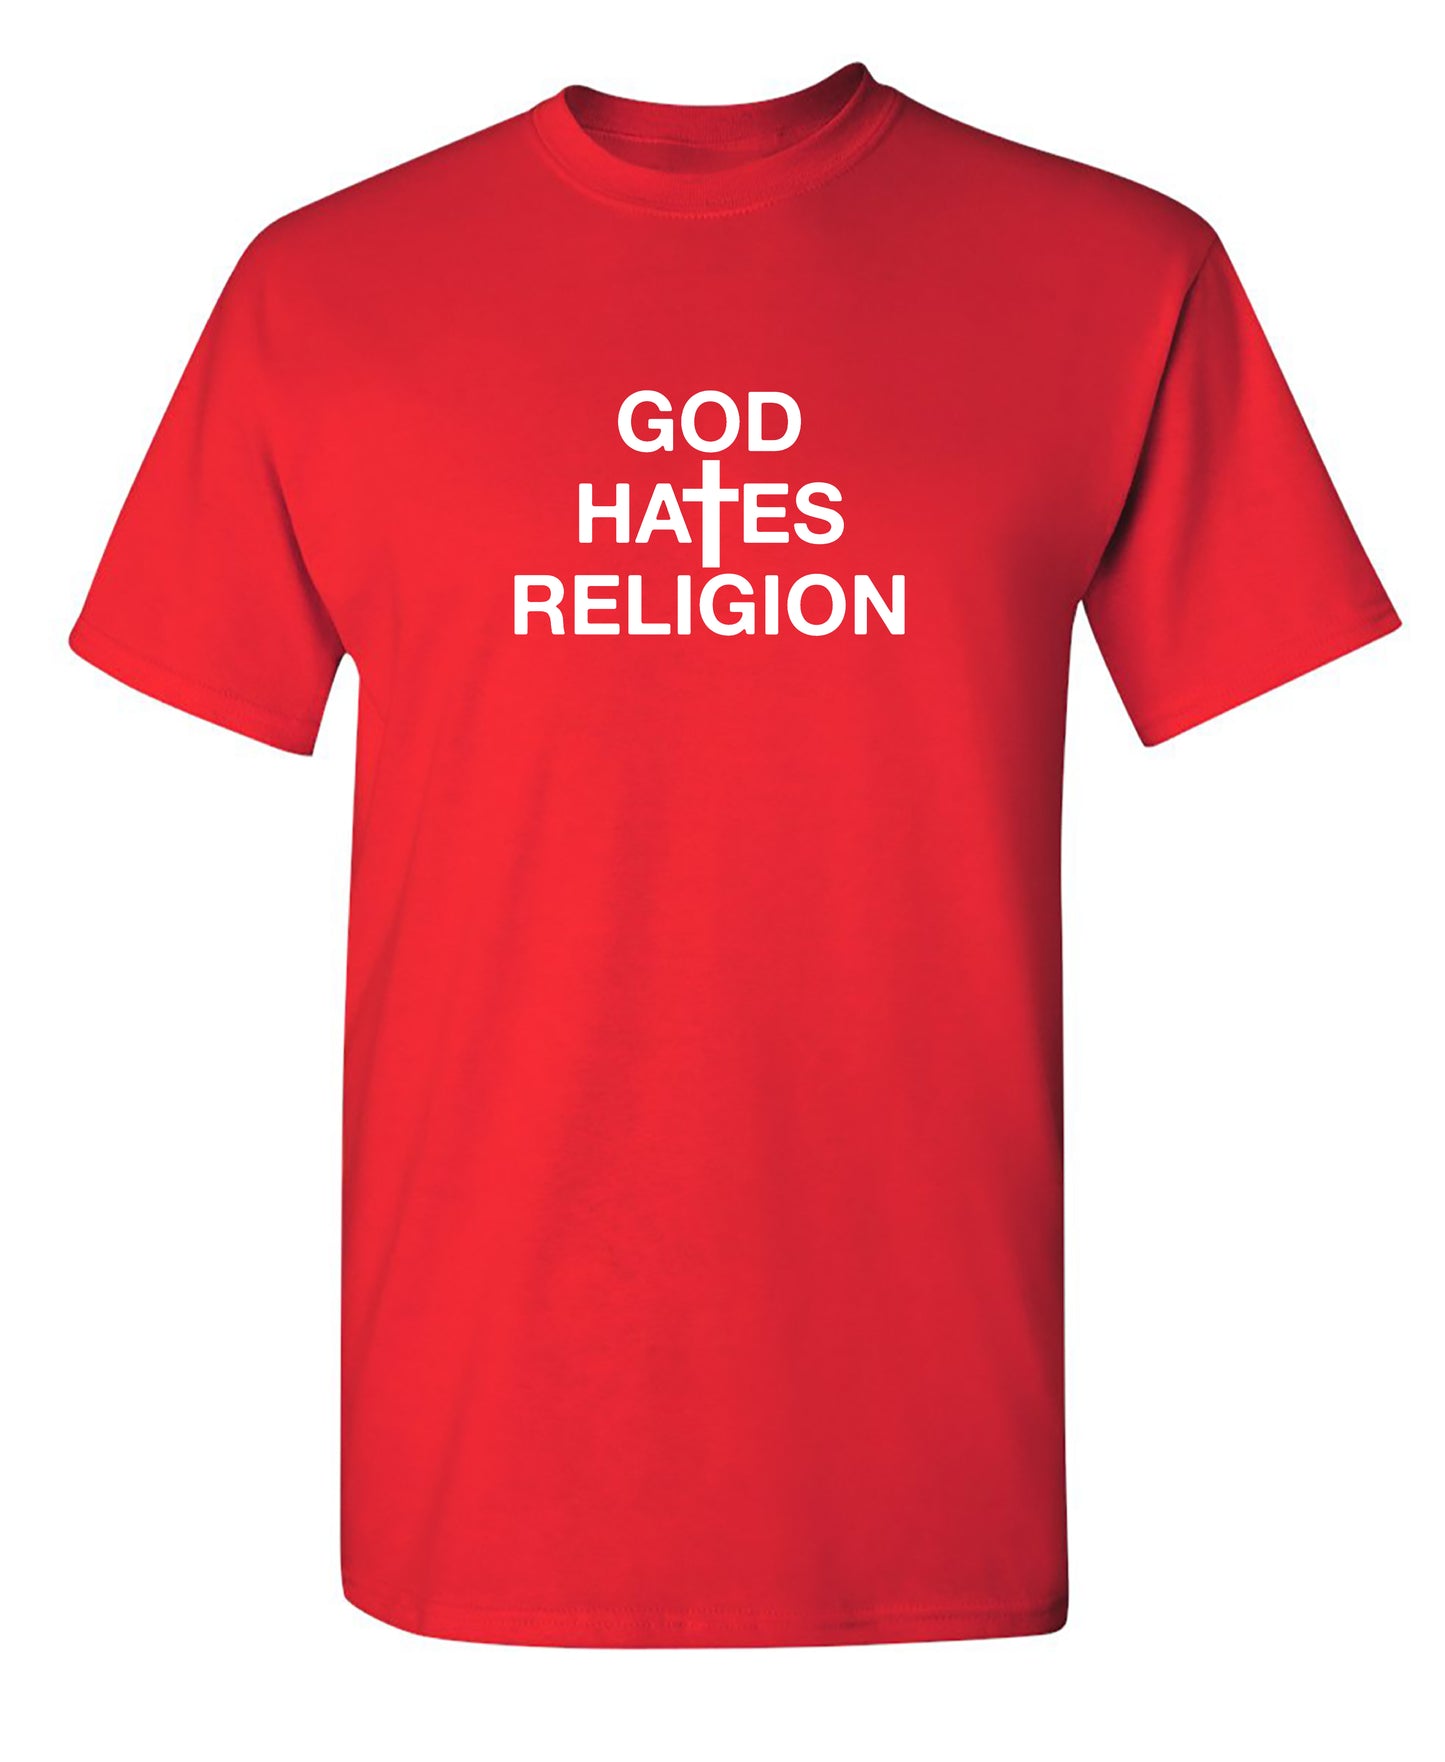 God Hates Religion - Funny T Shirts & Graphic Tees